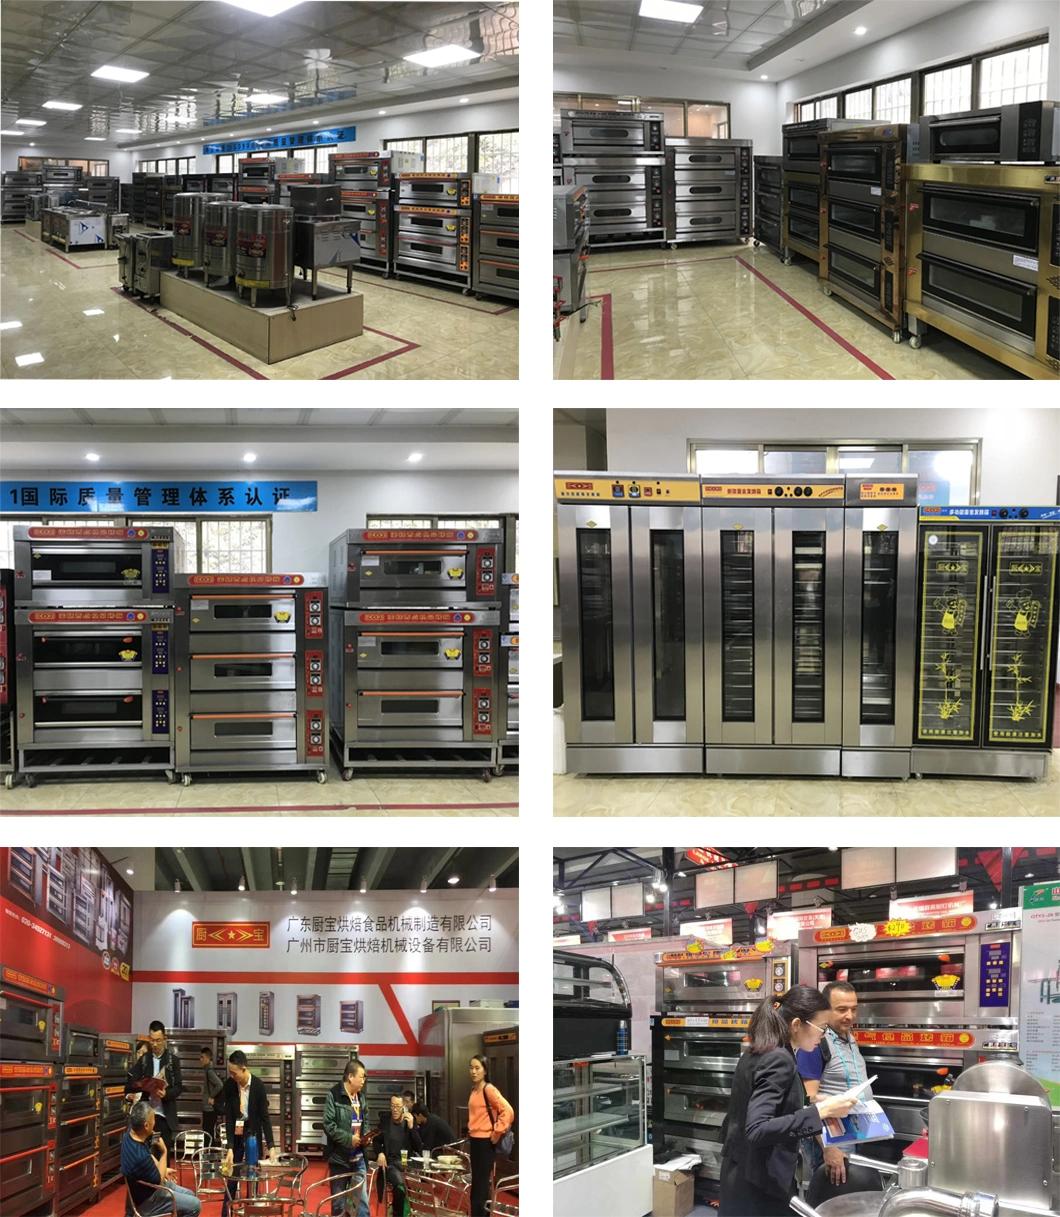 Commercial Kitchen 3 Deck 6 Trays Gas Oven for Restaurant Baking Machine Bakery Machinery Food Equipment Oven